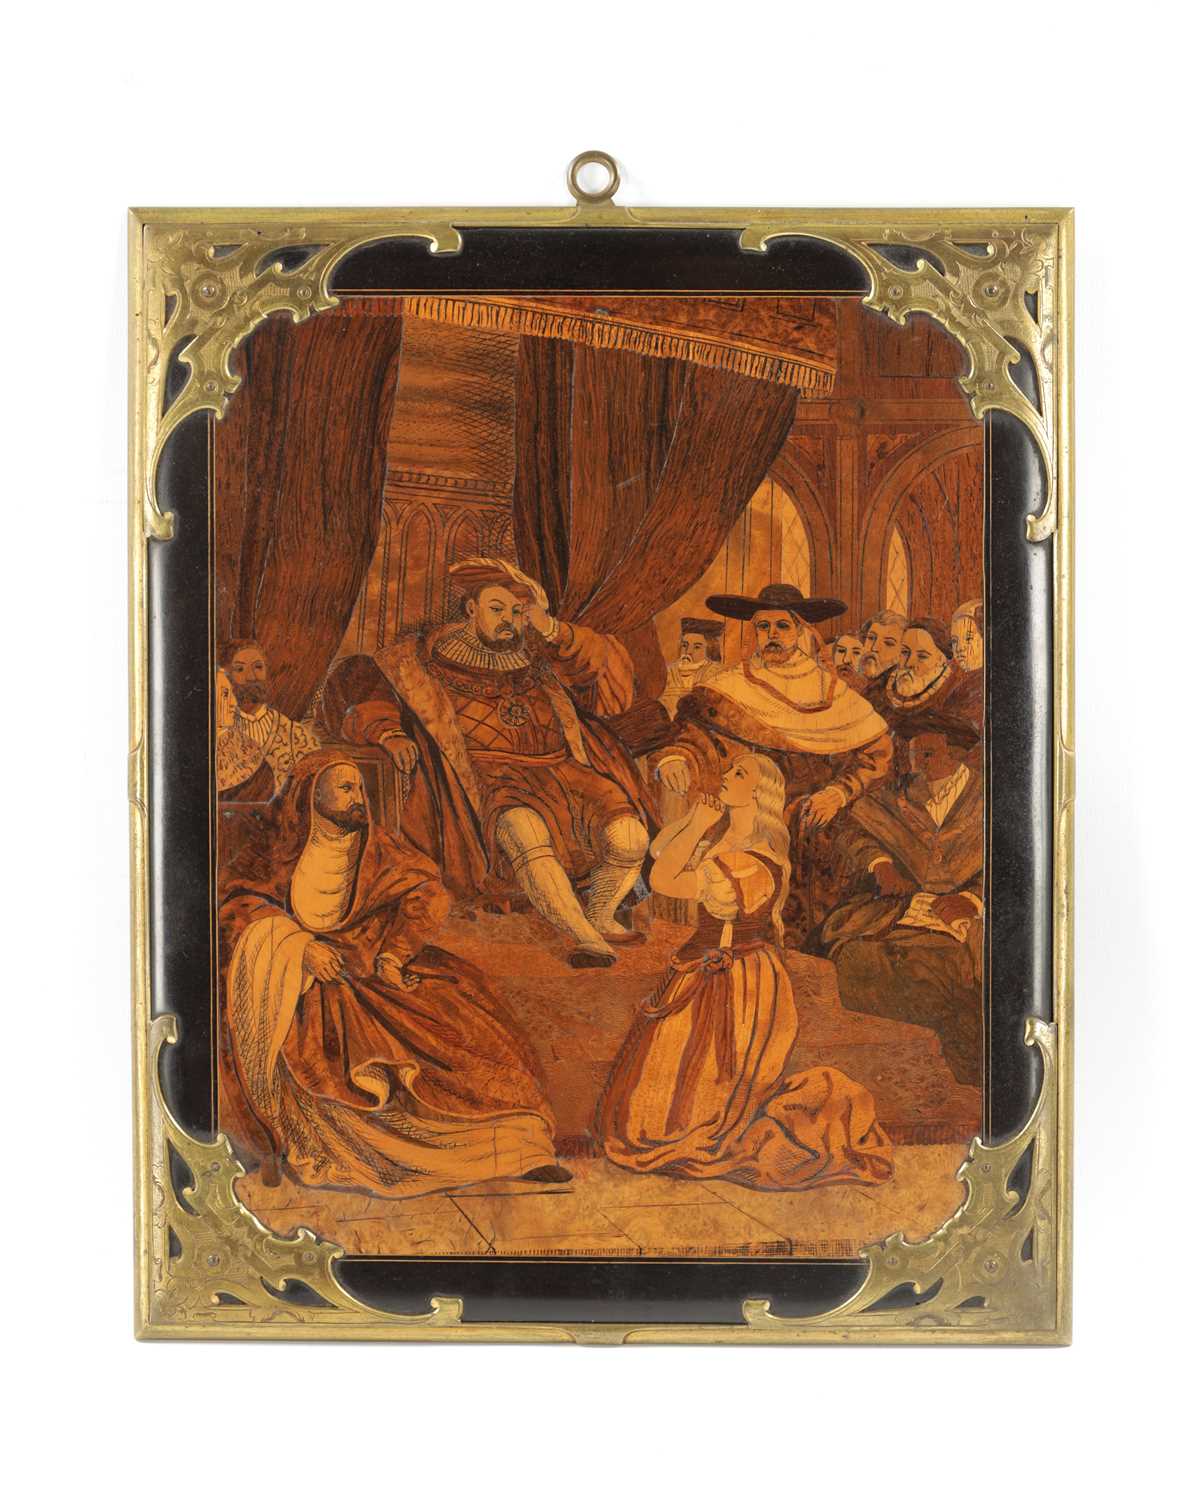 A 19TH CENTURY ORMOLU MOUNTED MARQUETRY WALL PANEL